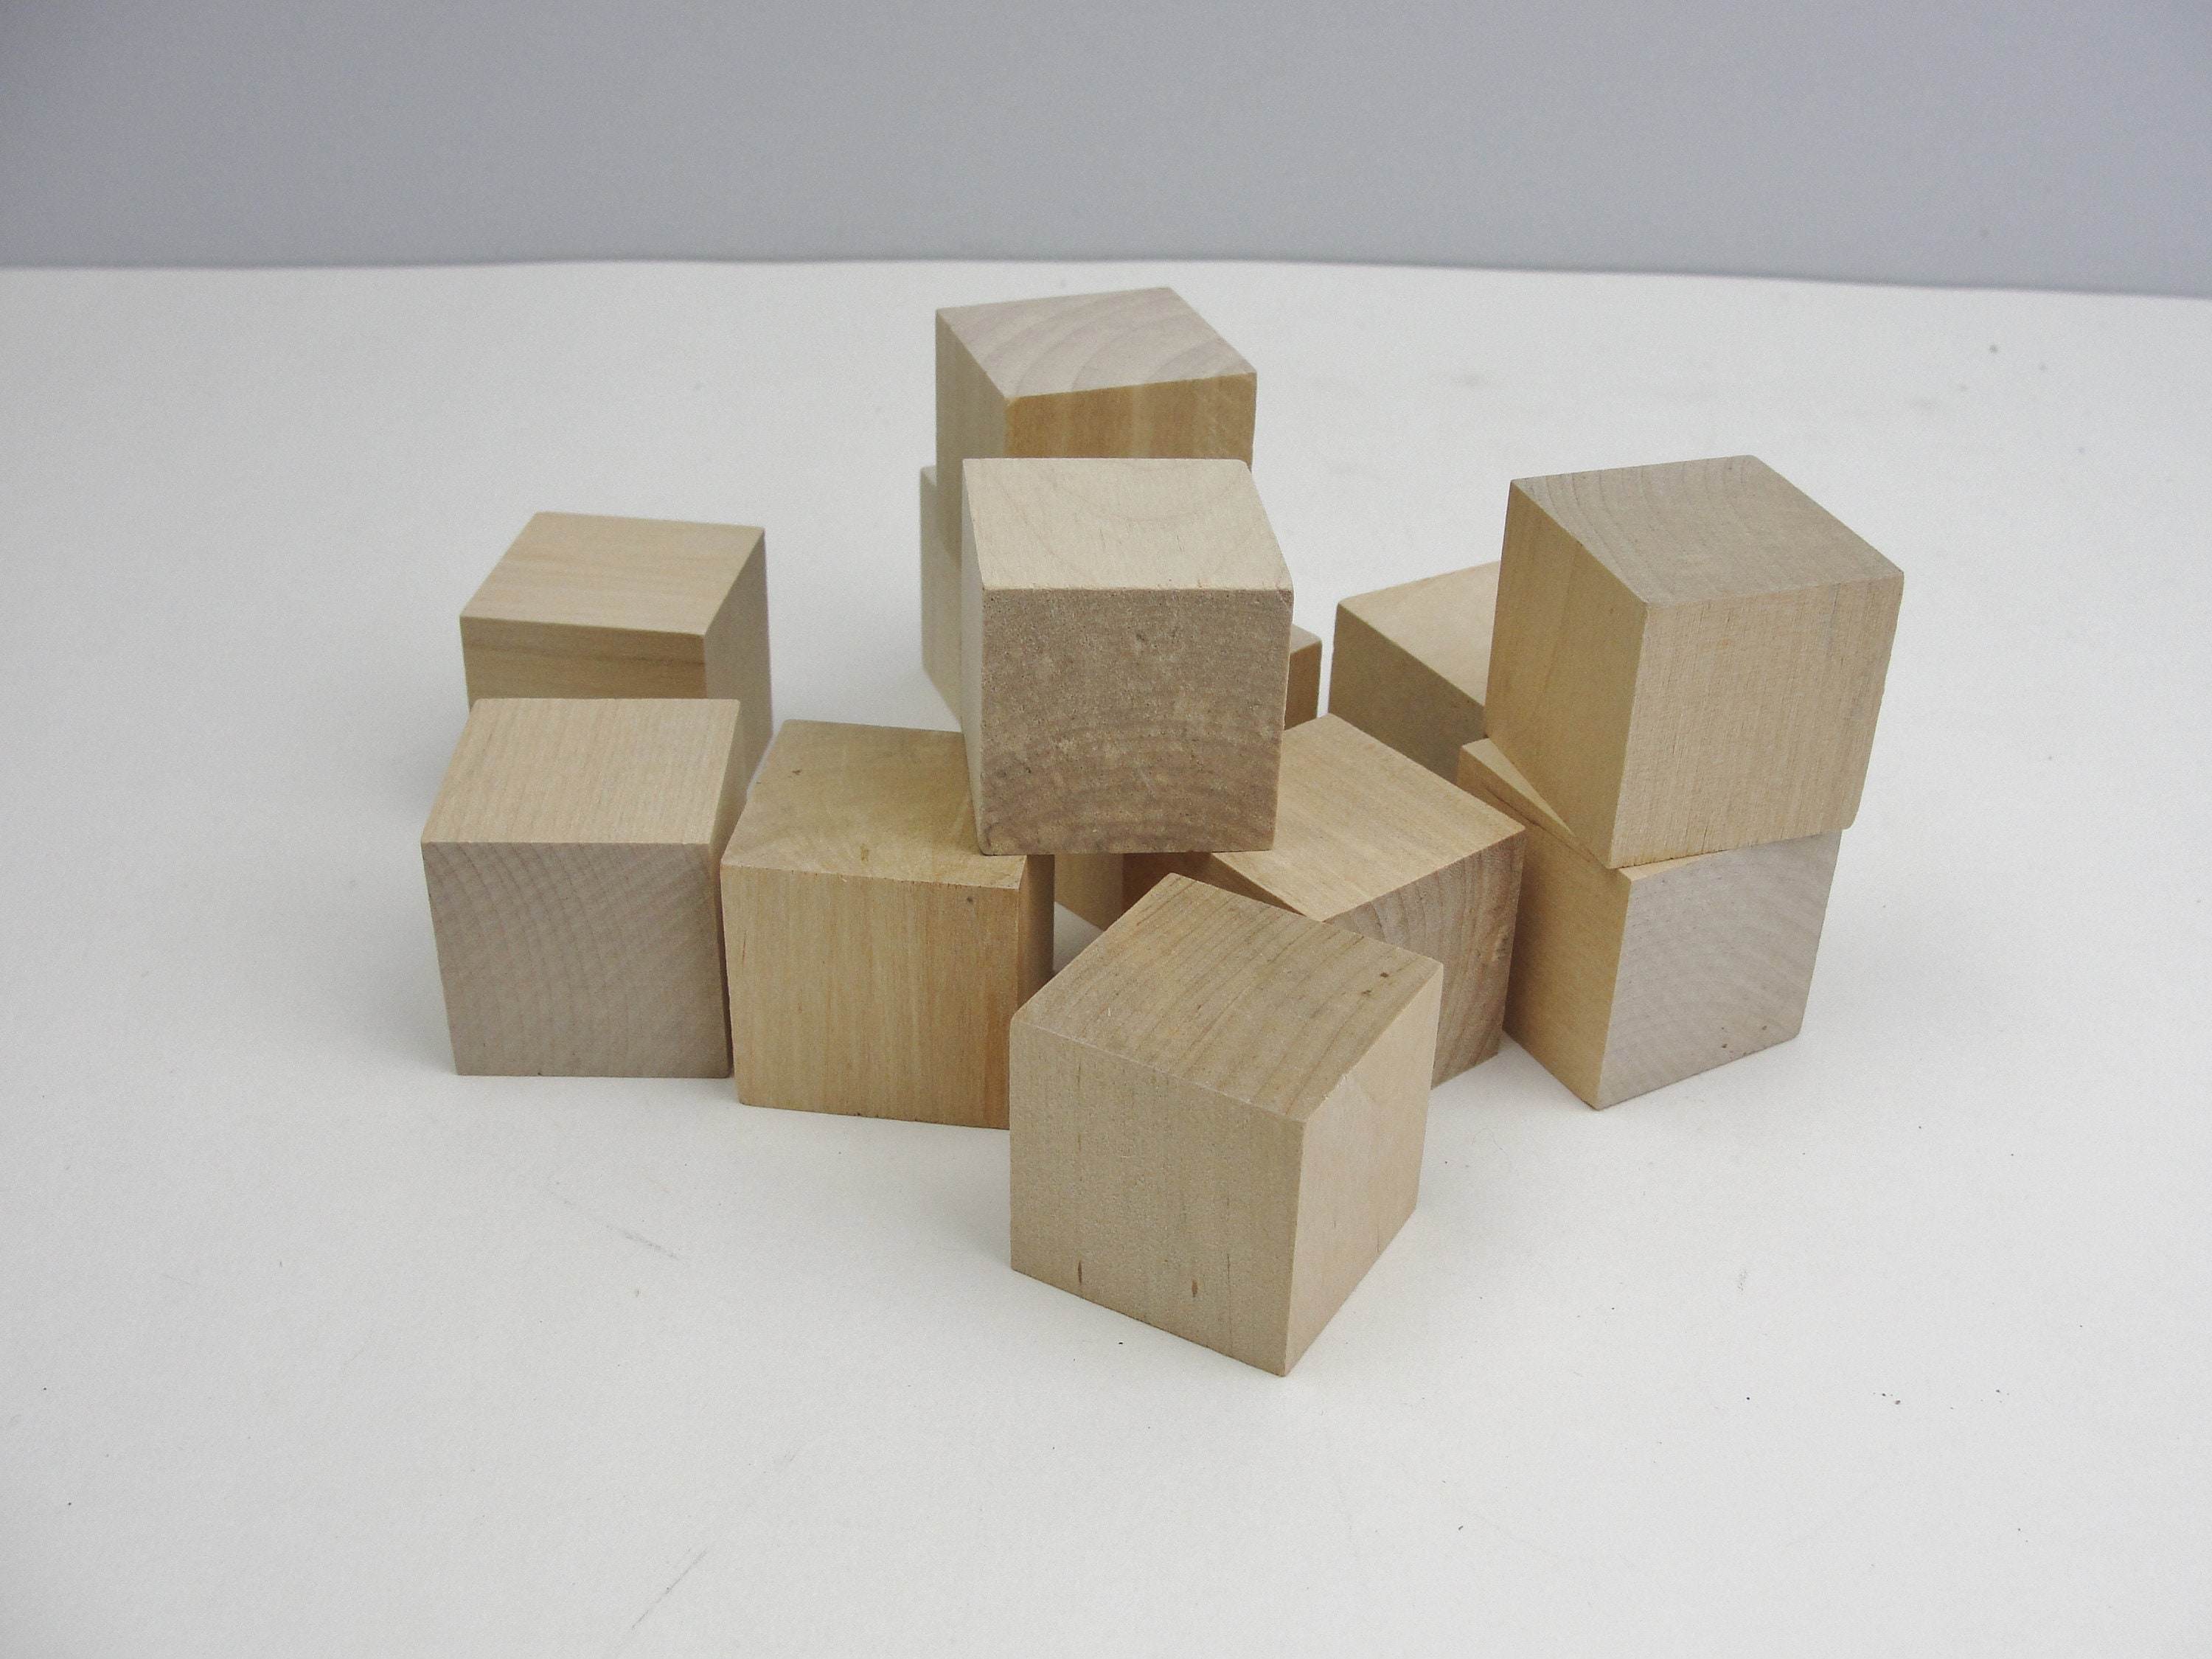 Wood Cubes 4 inch Unfinished, Small Blocks, Crafts & Décor